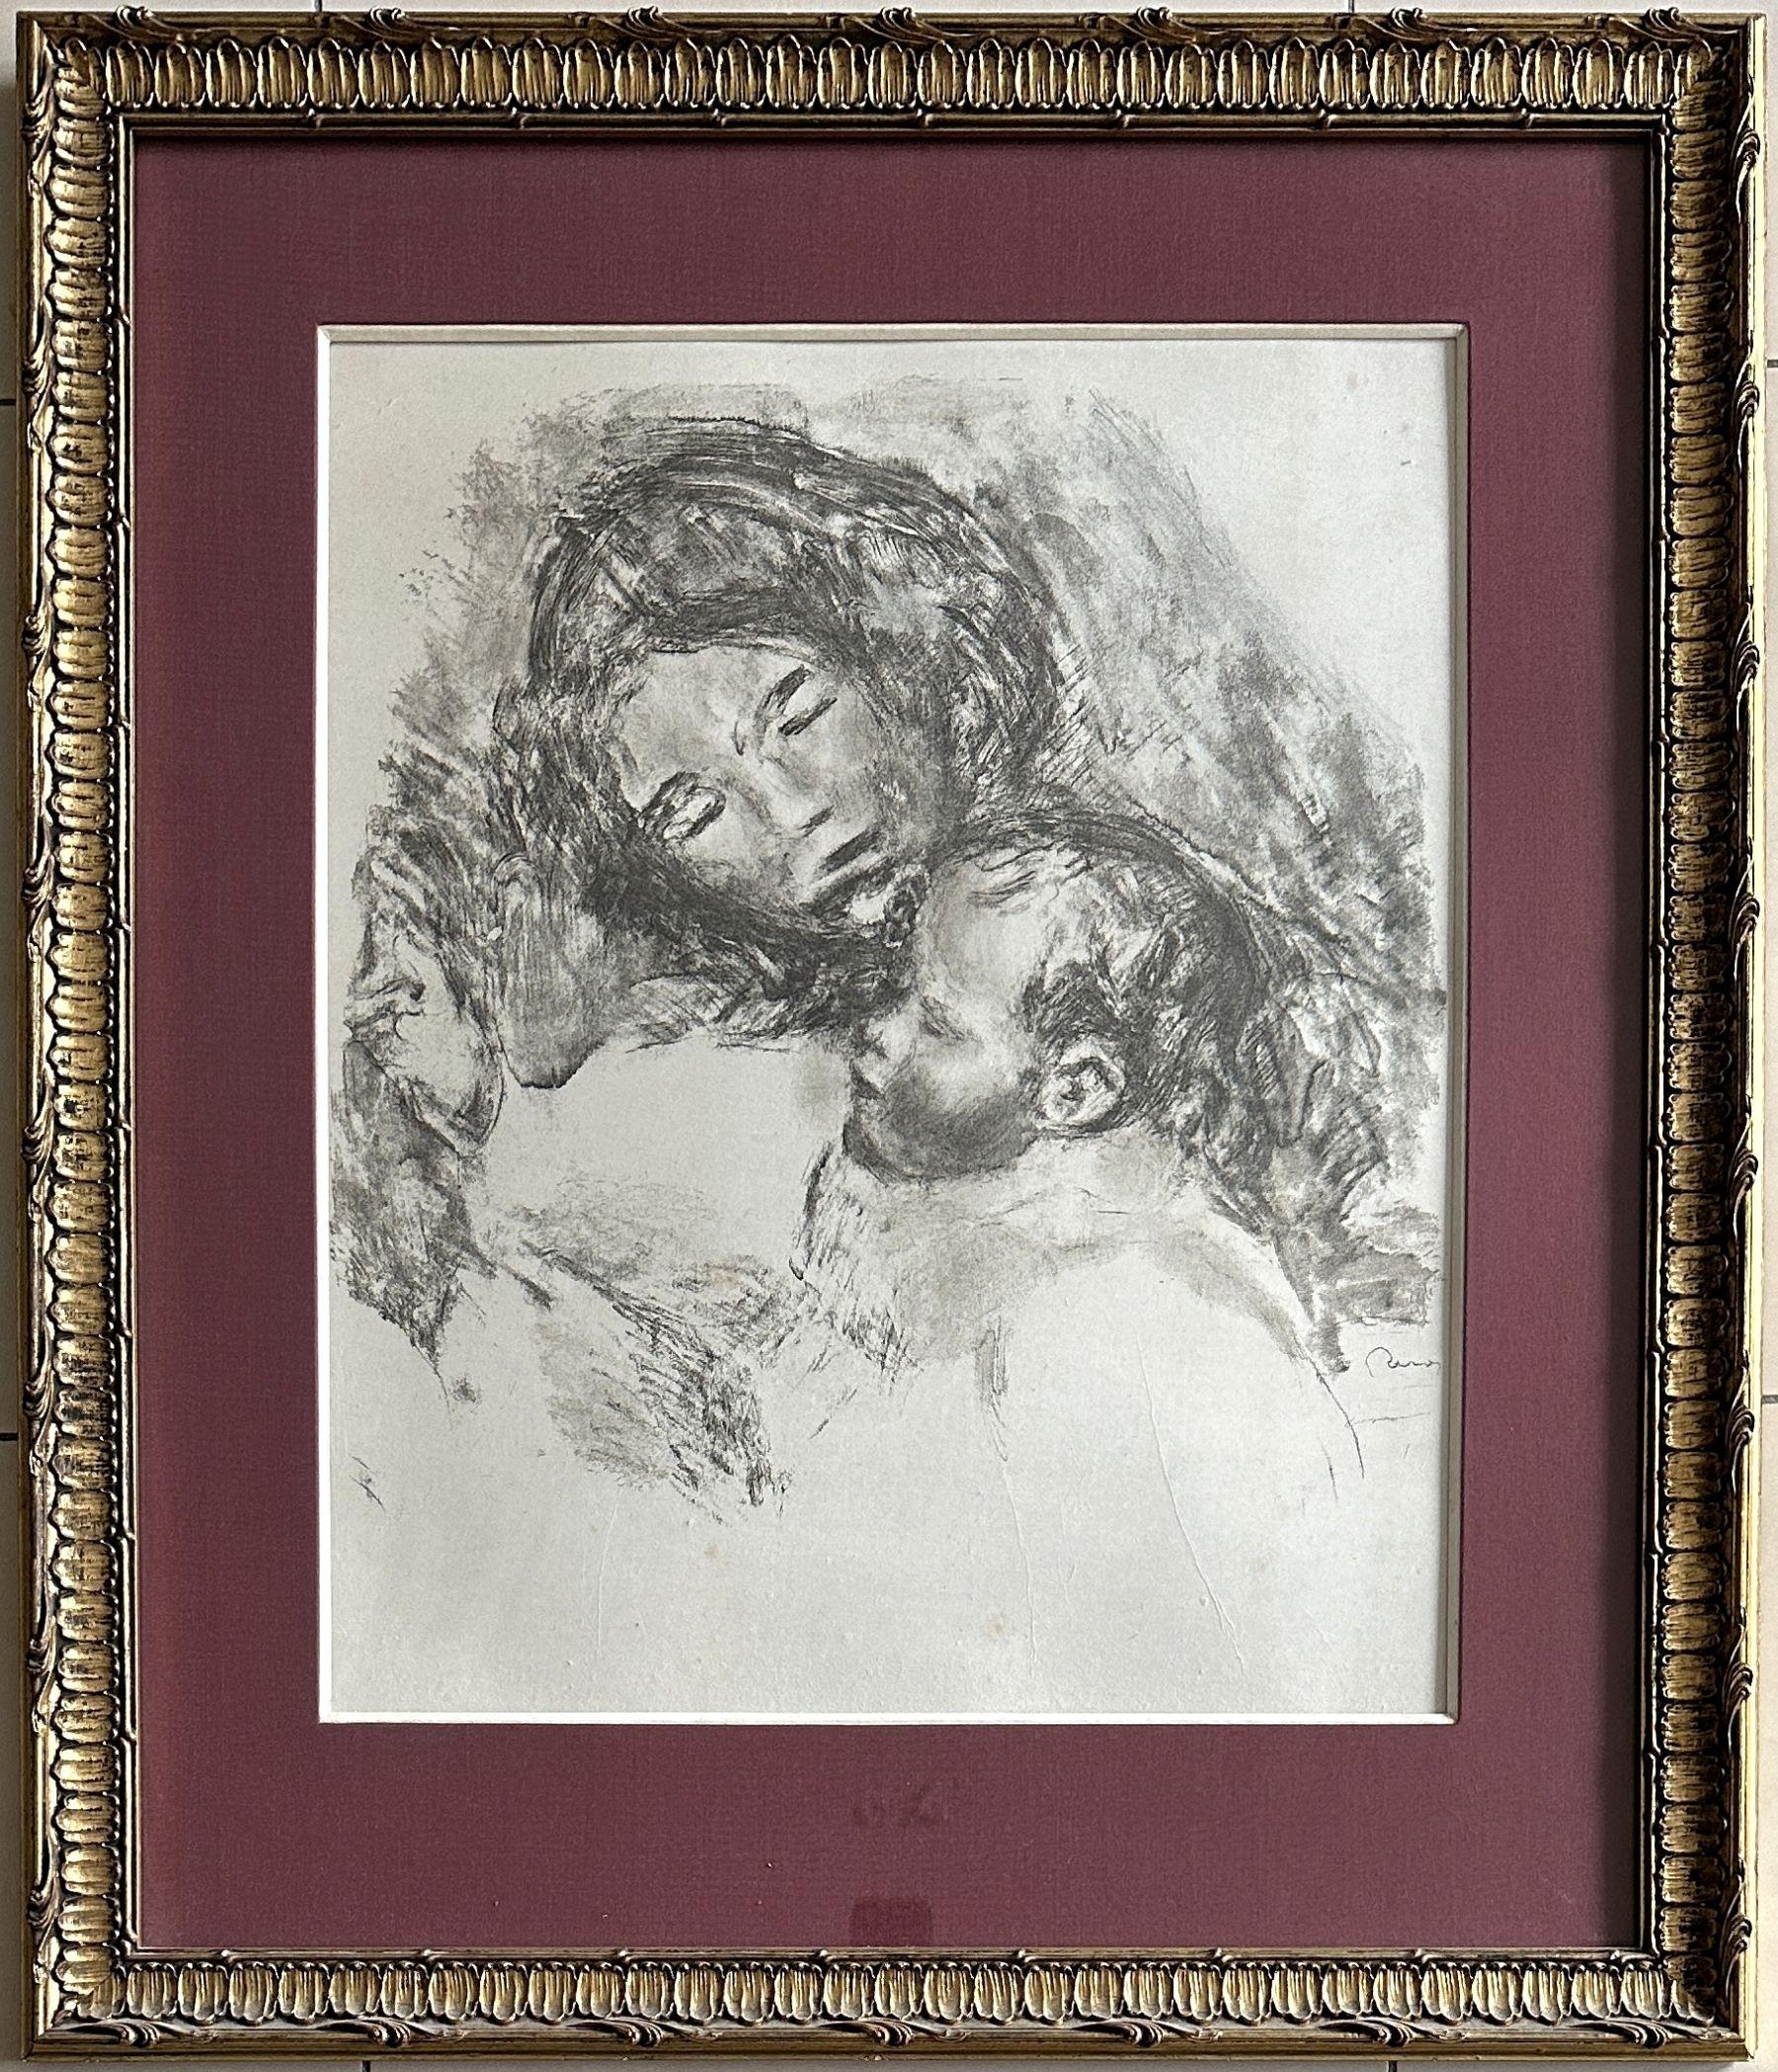 Maternity : Mom & His Child - Original Lithograph Signed Plate - Delteil 50 - Print by Pierre Auguste Renoir